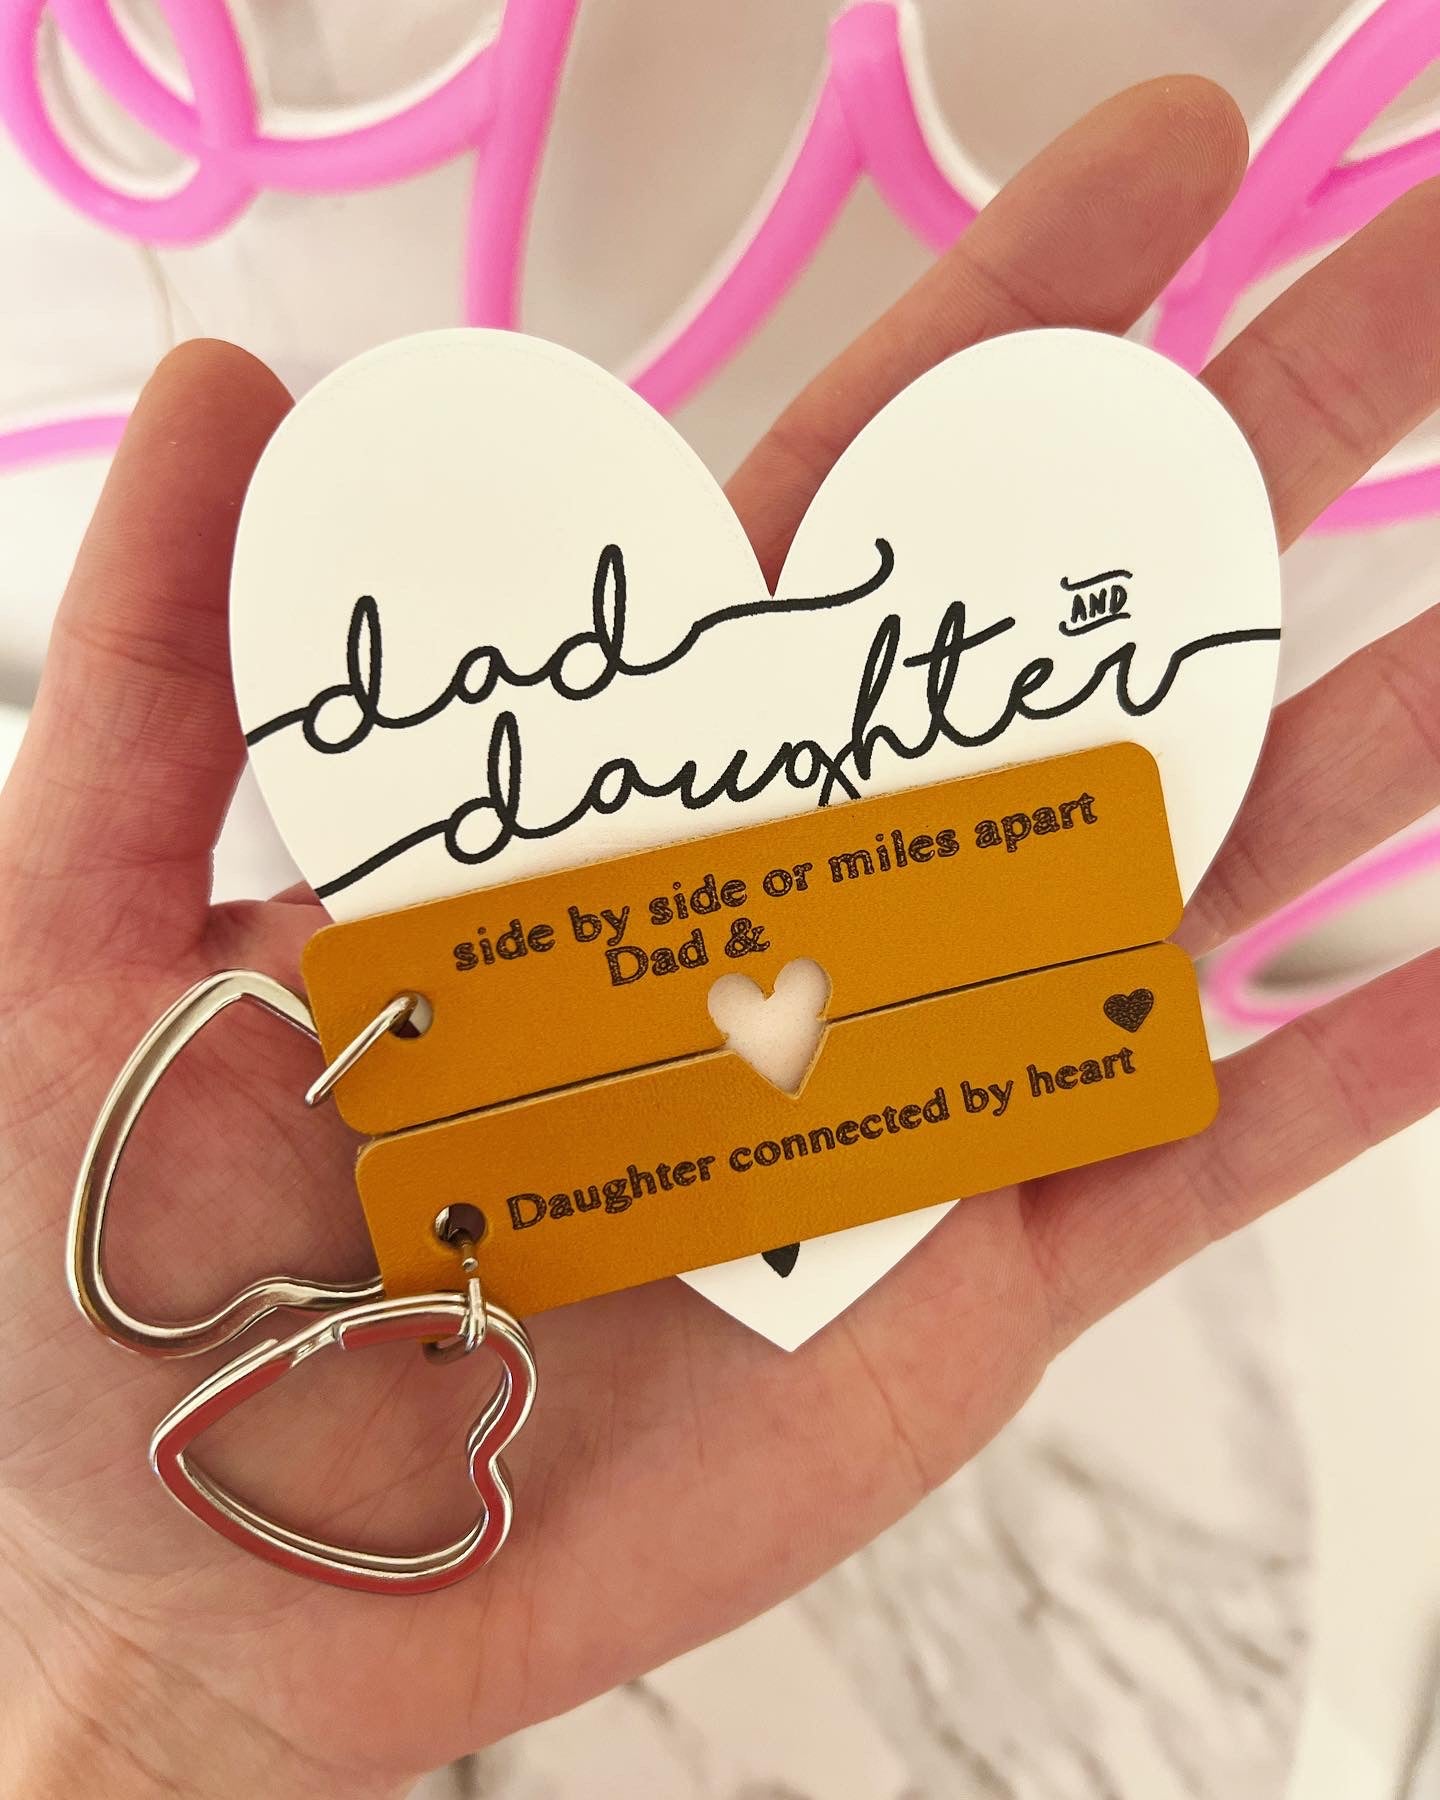 Pair of Leather Laser Engraved heart key chains, Father daughter gift, card, box & ribbon included